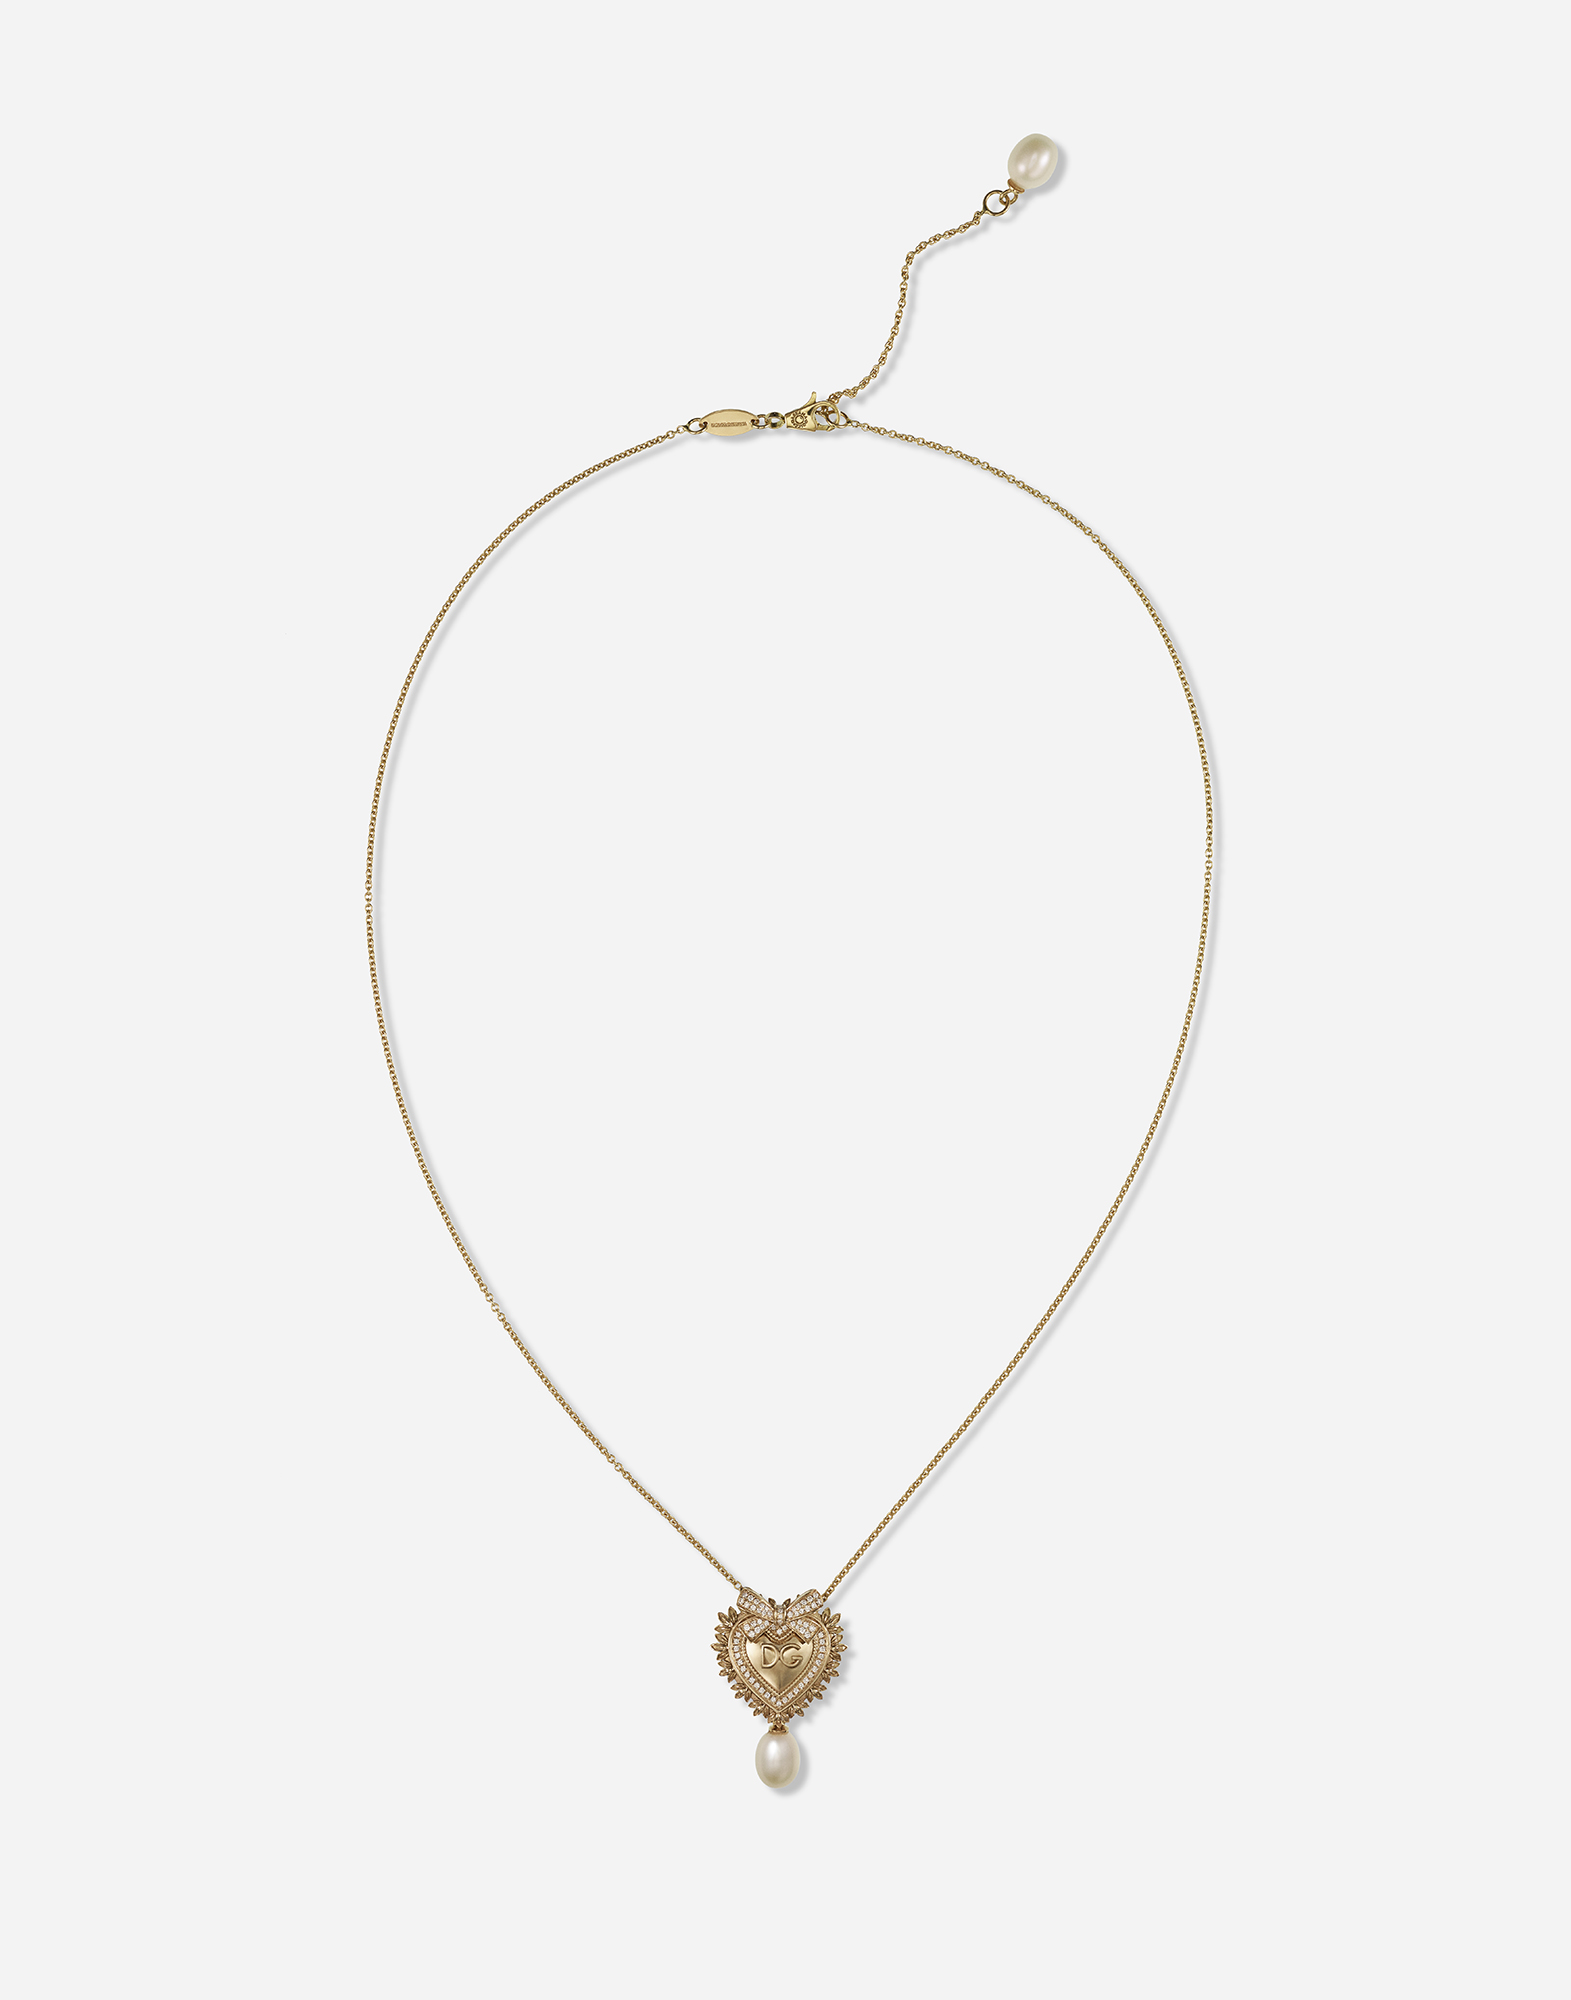 Dolce & Gabbana Devotion Necklace In Yellow Gold With Diamonds And Pearls Yellow Gold Female Onesize